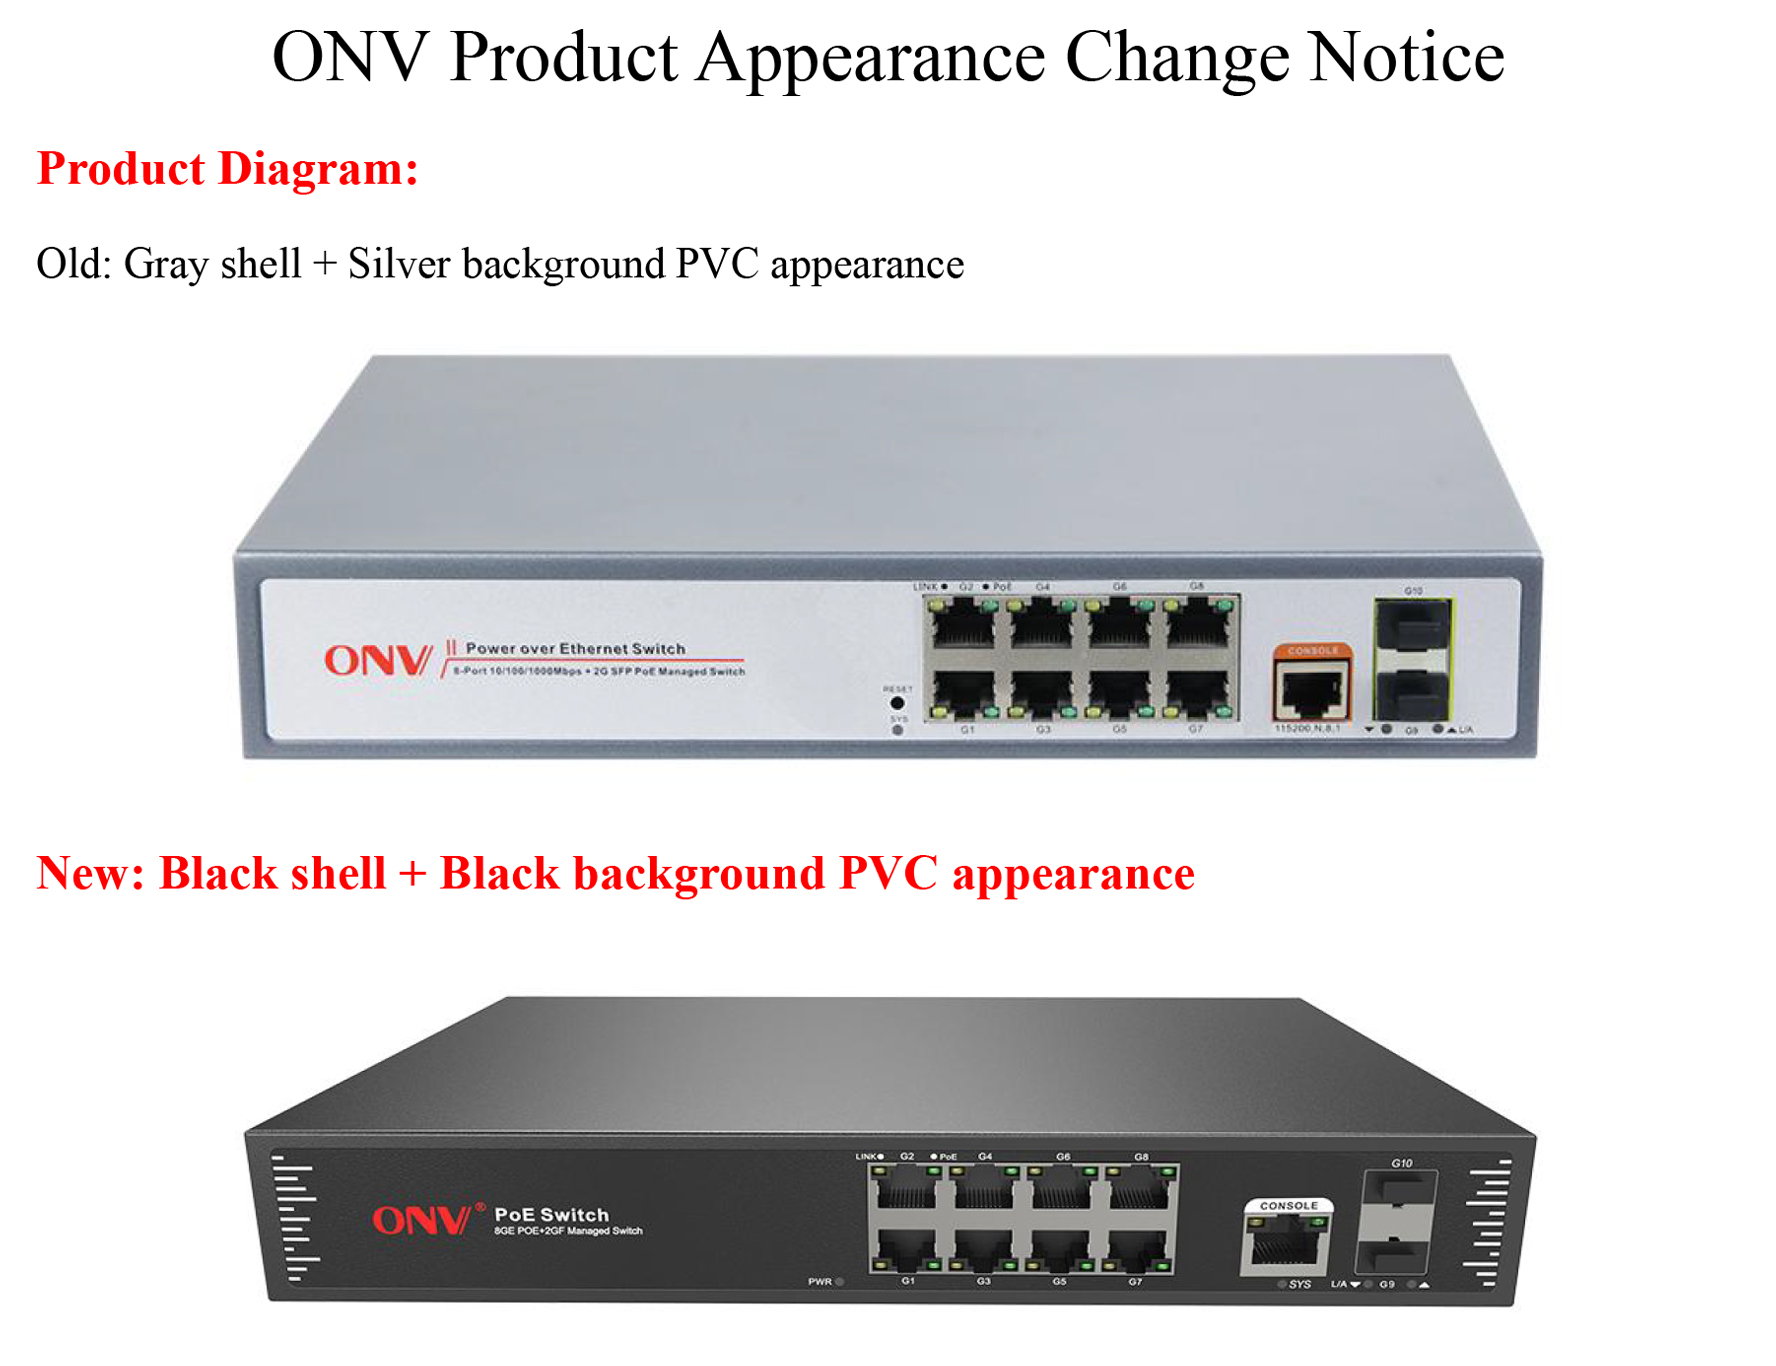 ONV Product Appearance Change Notice